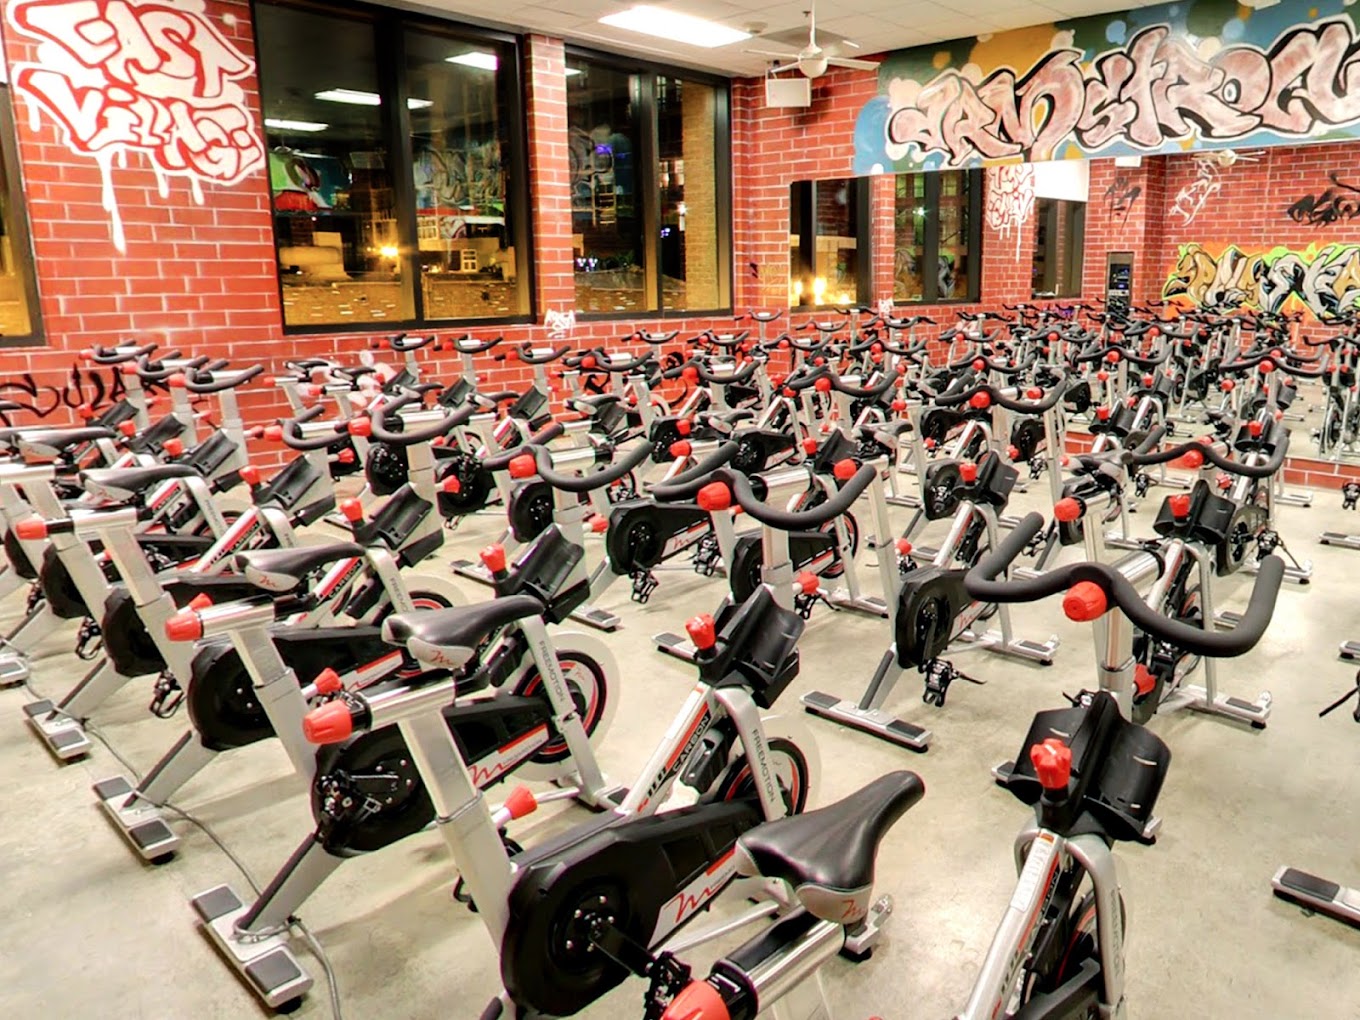 Spinning bikes in a gym with graffiti on the walls.